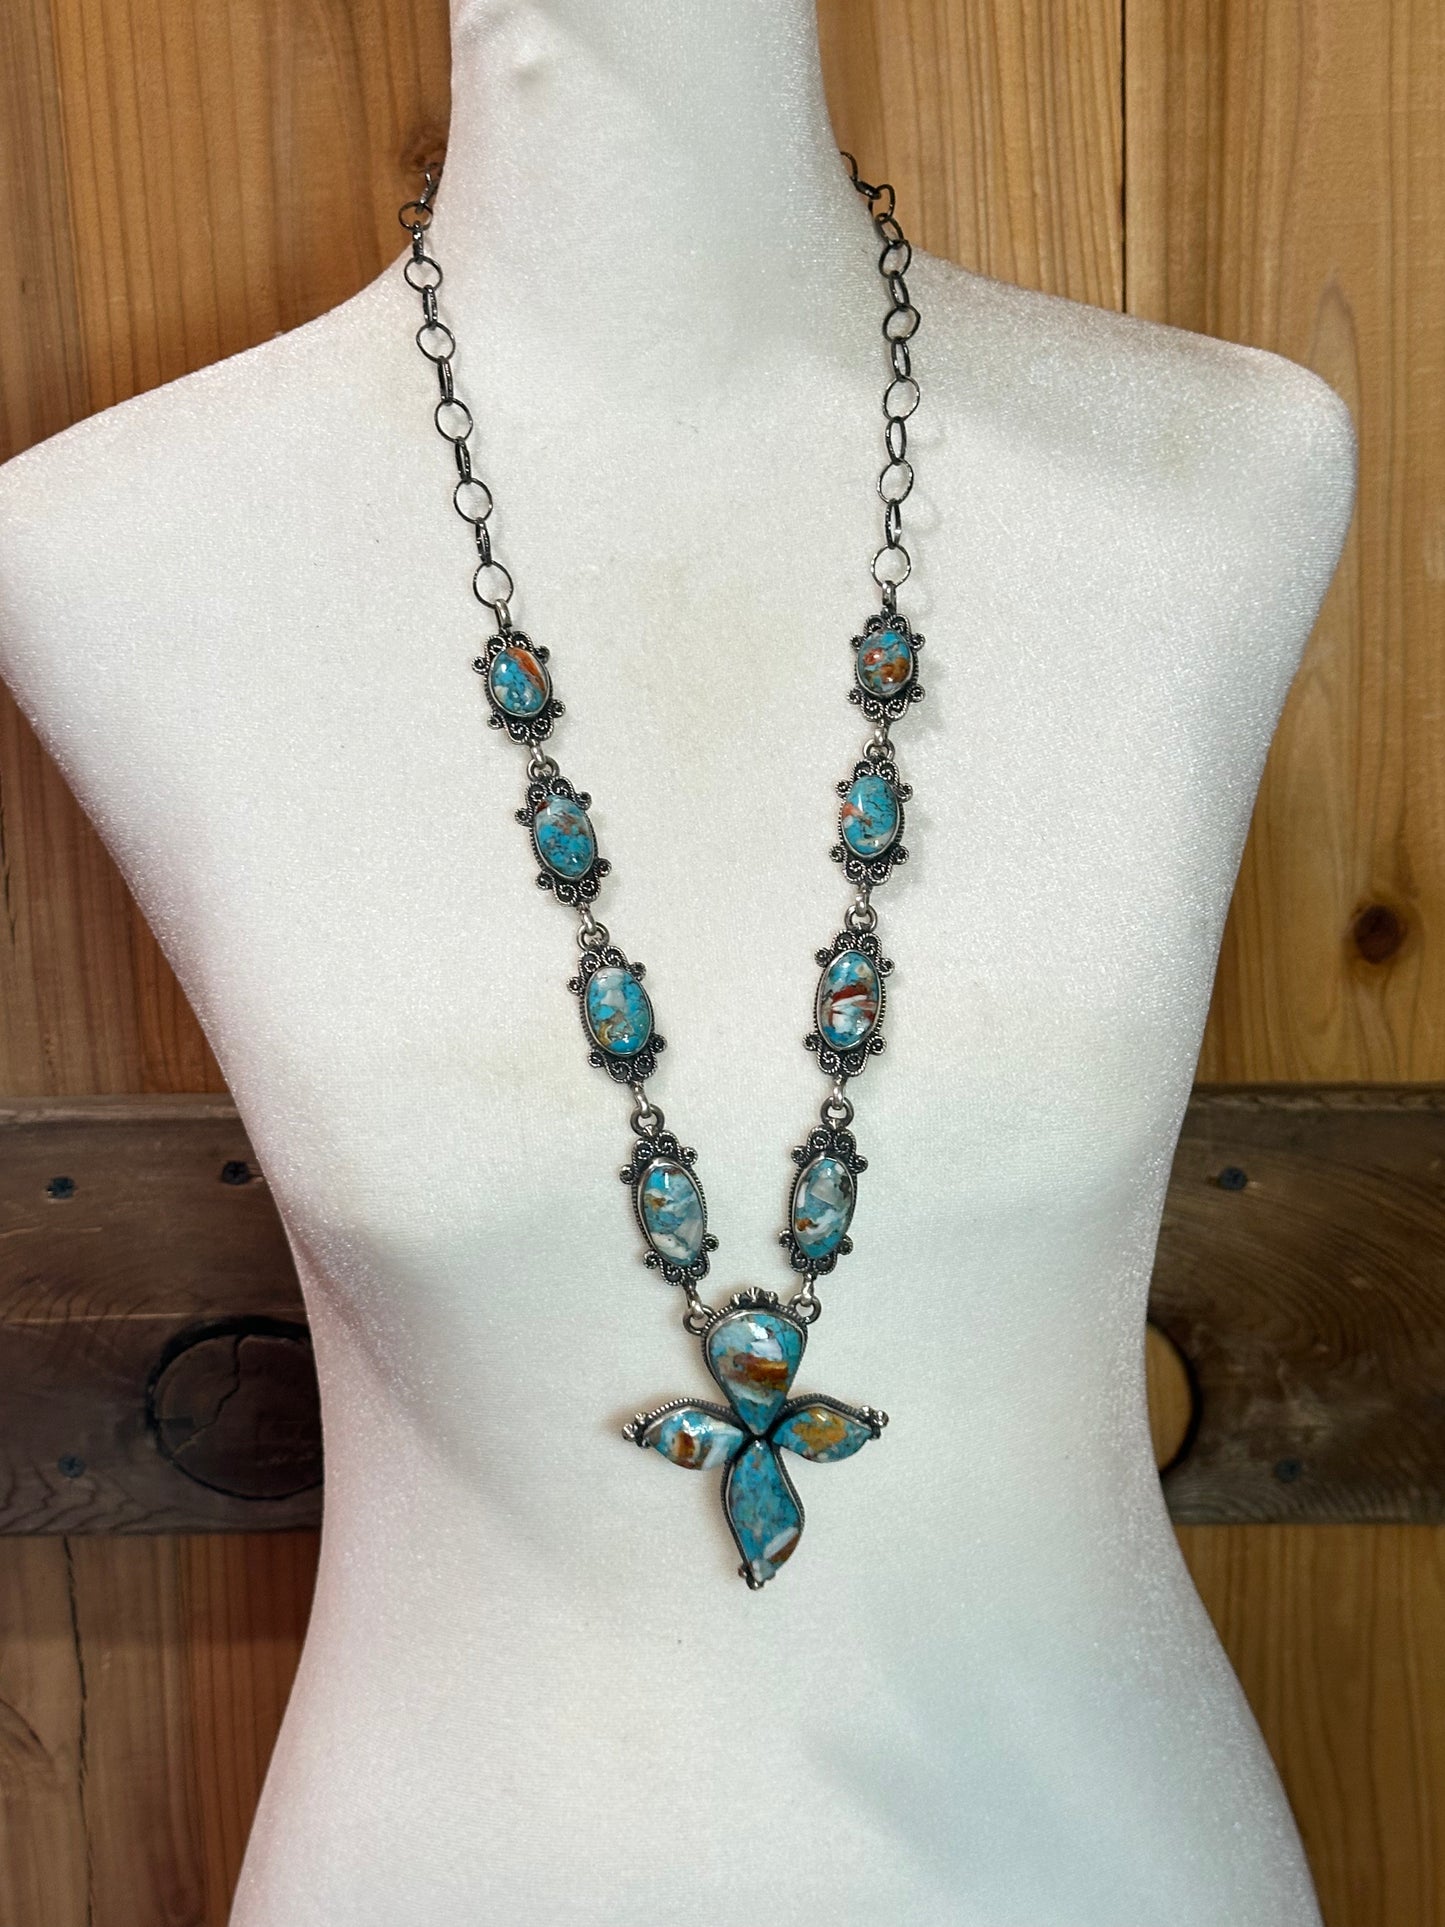 Spiny Turquoise Cross Lariat Style Necklace by Zia